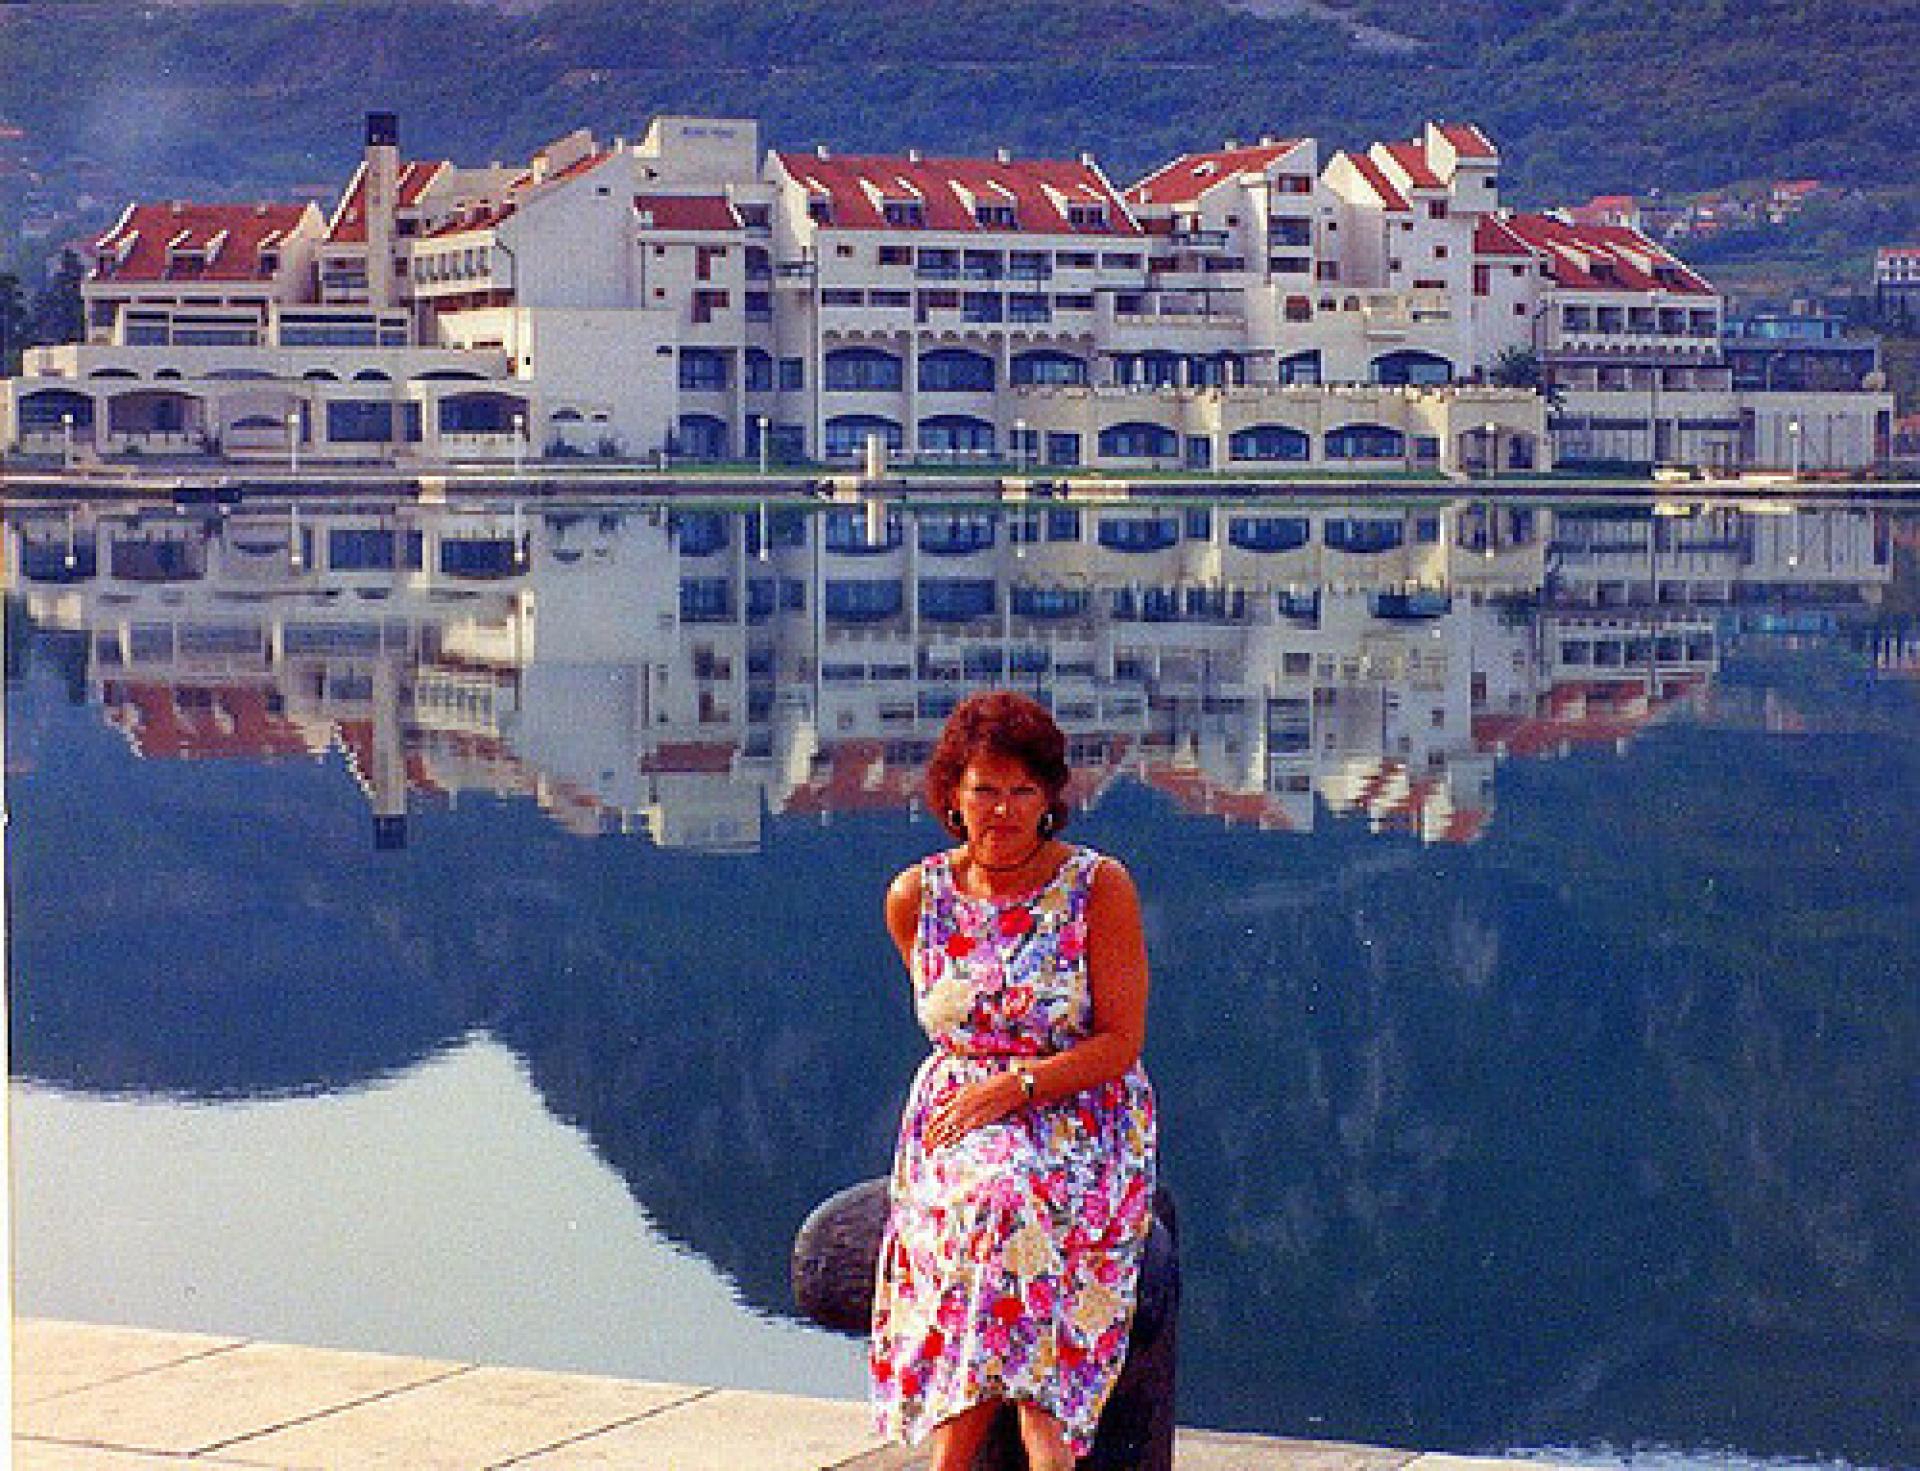 Hotel Fjord stands at the very end of Boka Kotorska close to Kotor’s historic center, a UNESCO-protected site in Montenegro.